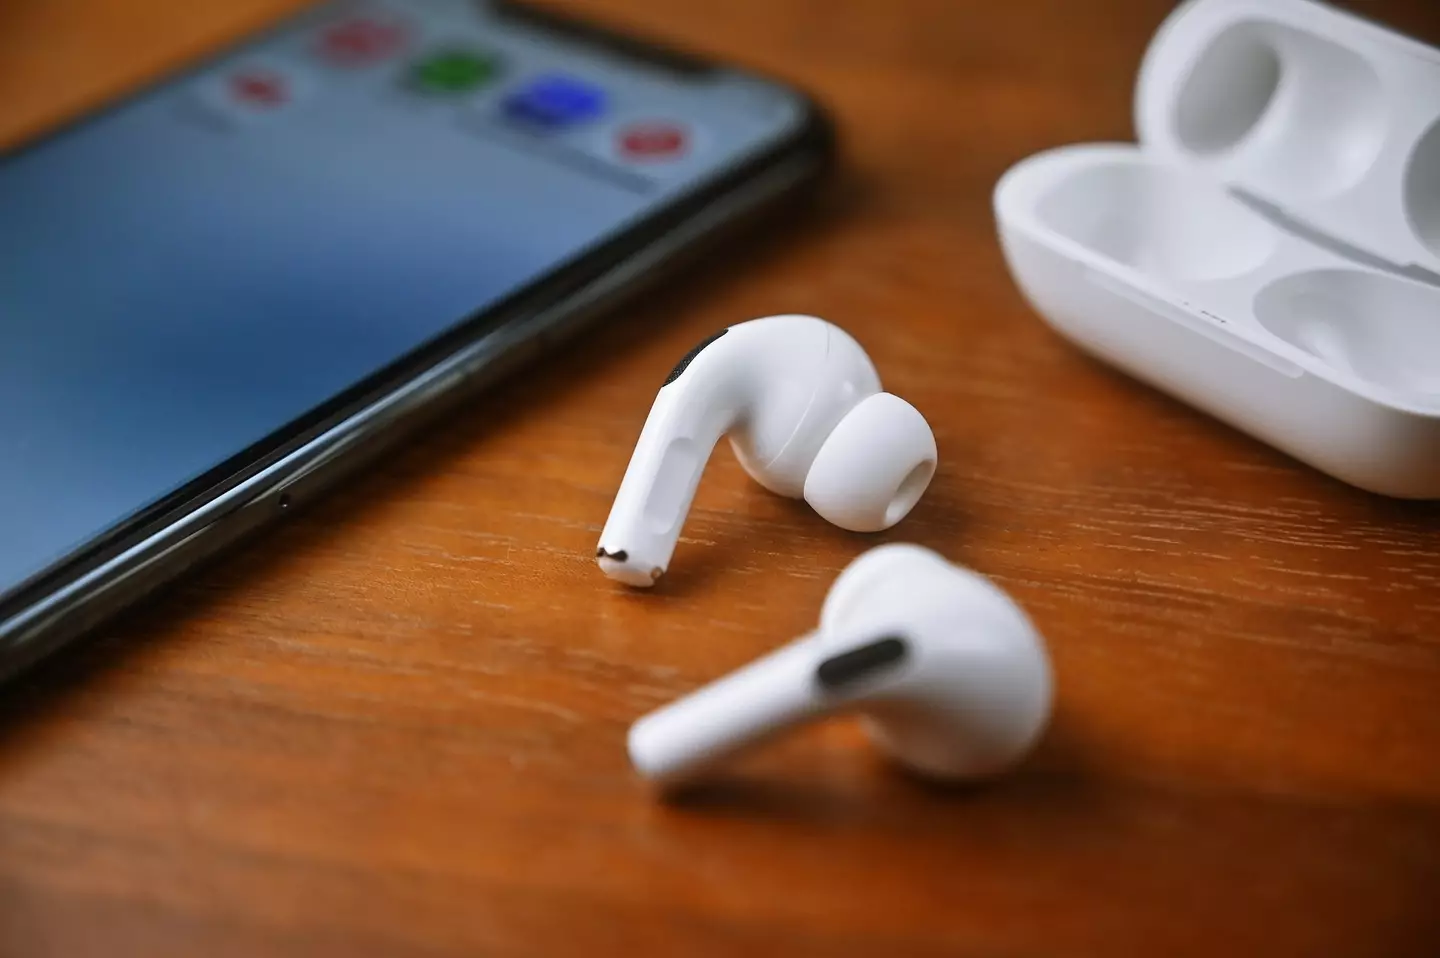 Apple's AirPods are also listed in the warning.